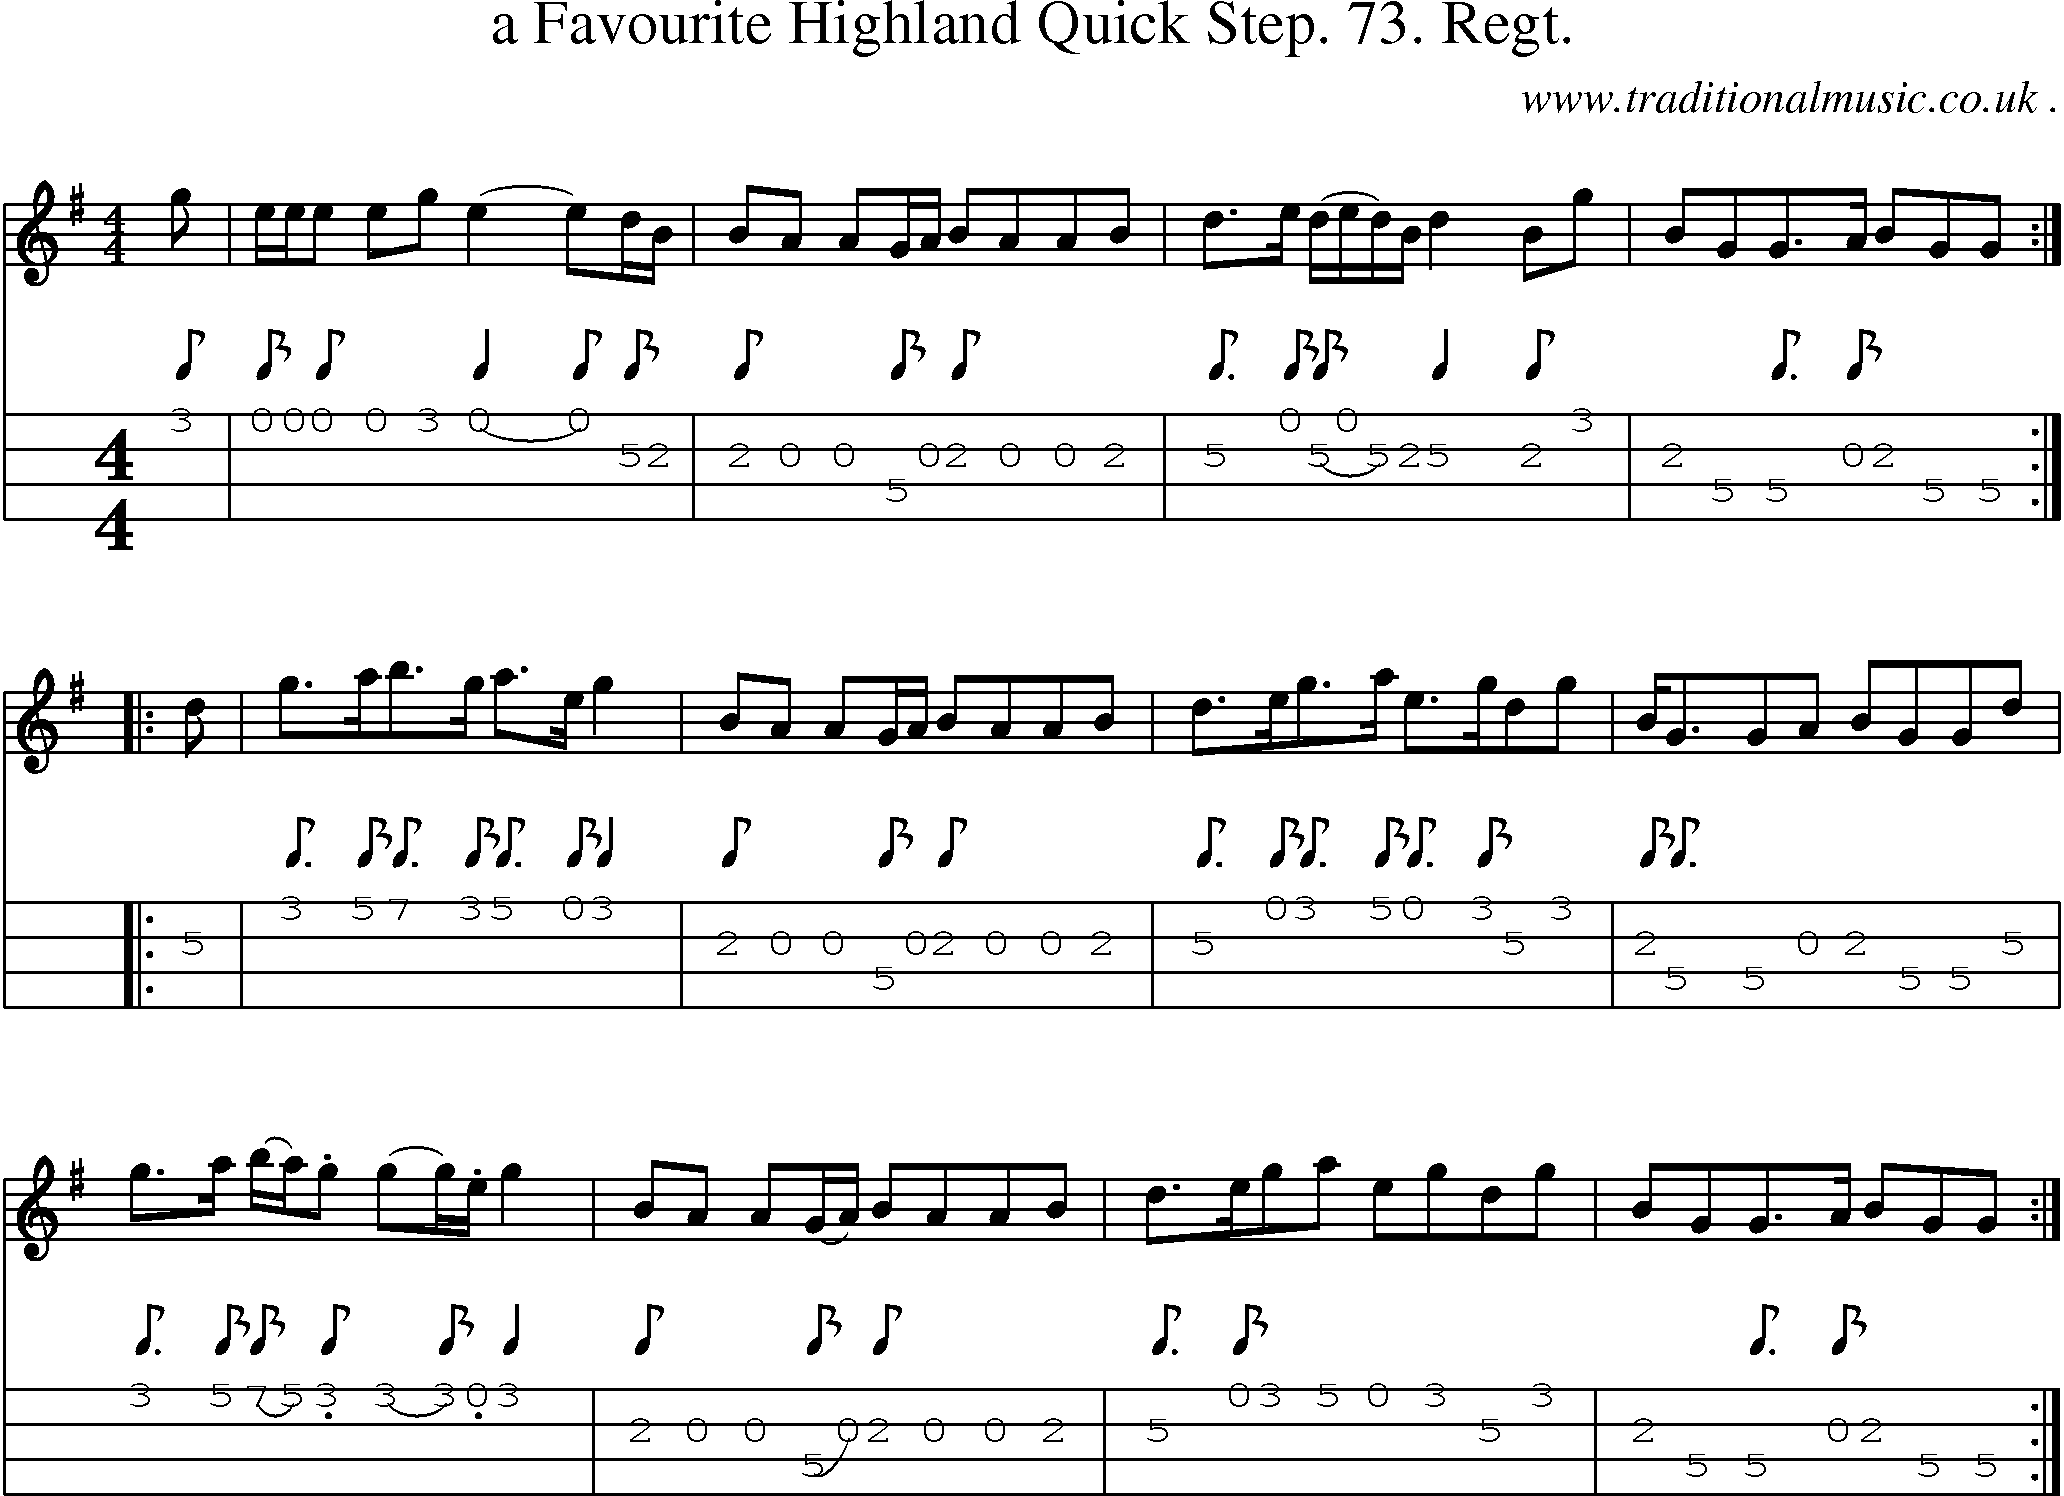 Sheet-music  score, Chords and Mandolin Tabs for A Favourite Highland Quick Step 73 Regt